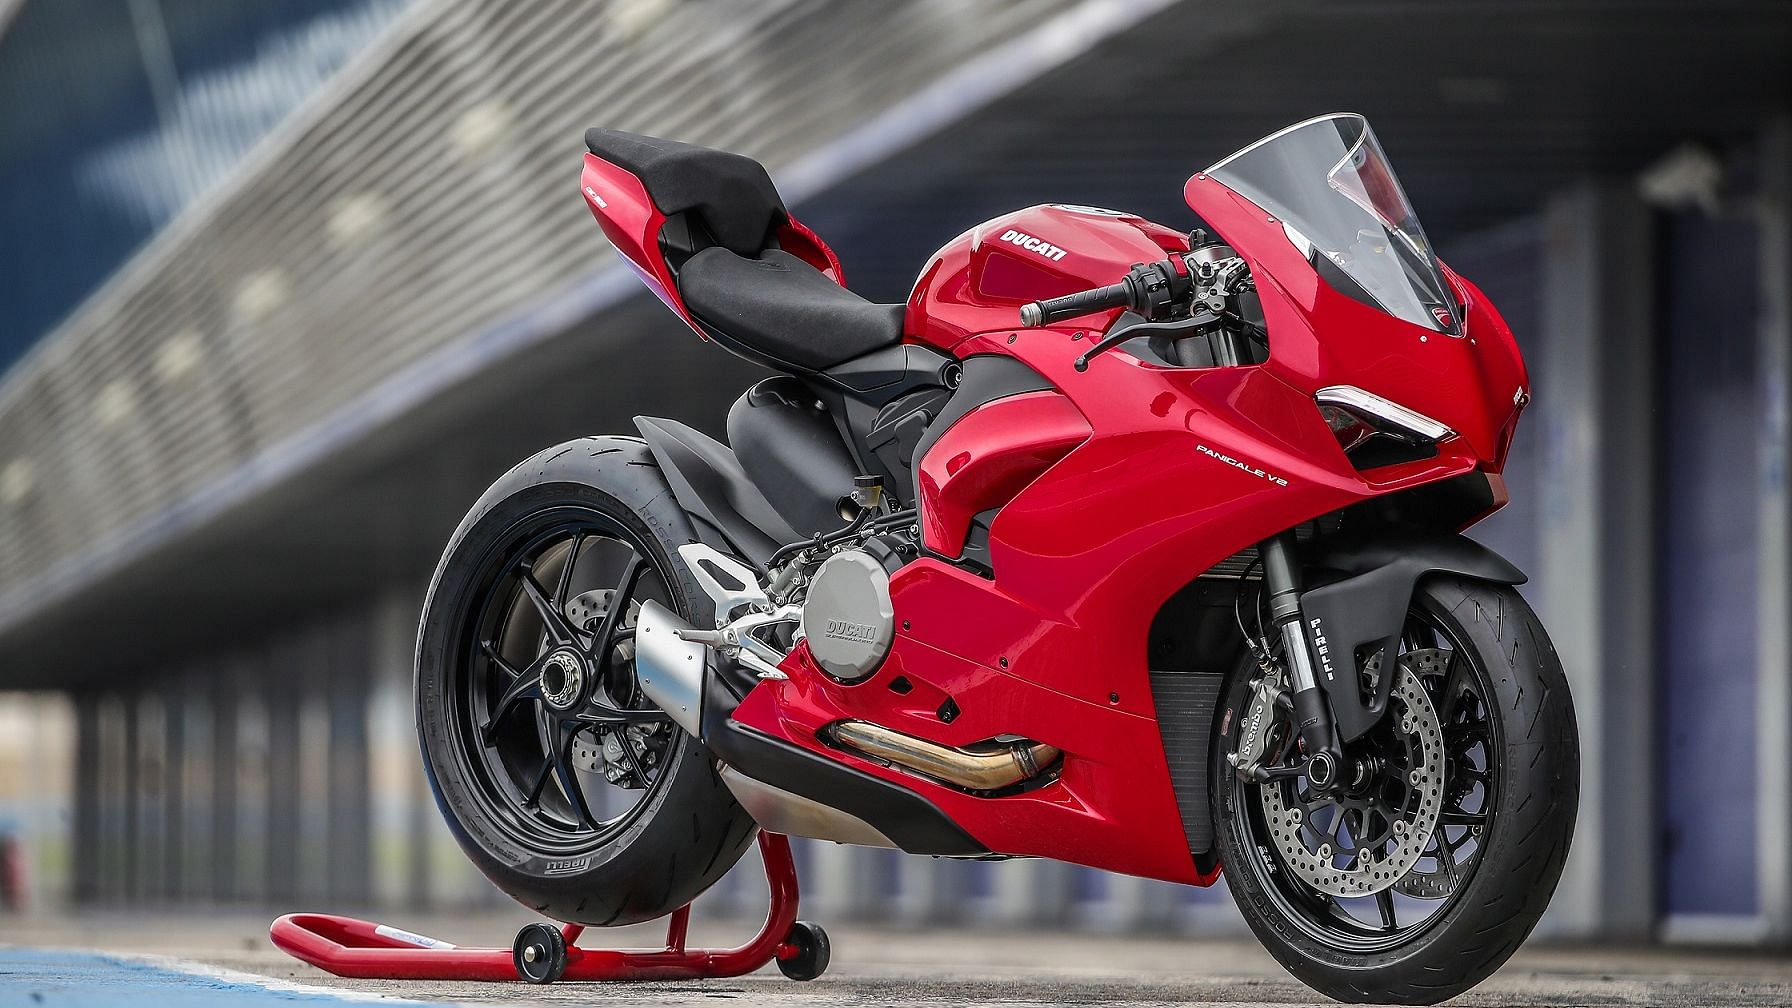 The new Ducati Panigale V2 is powered by a 955cc twin-cylinder engine.&nbsp;